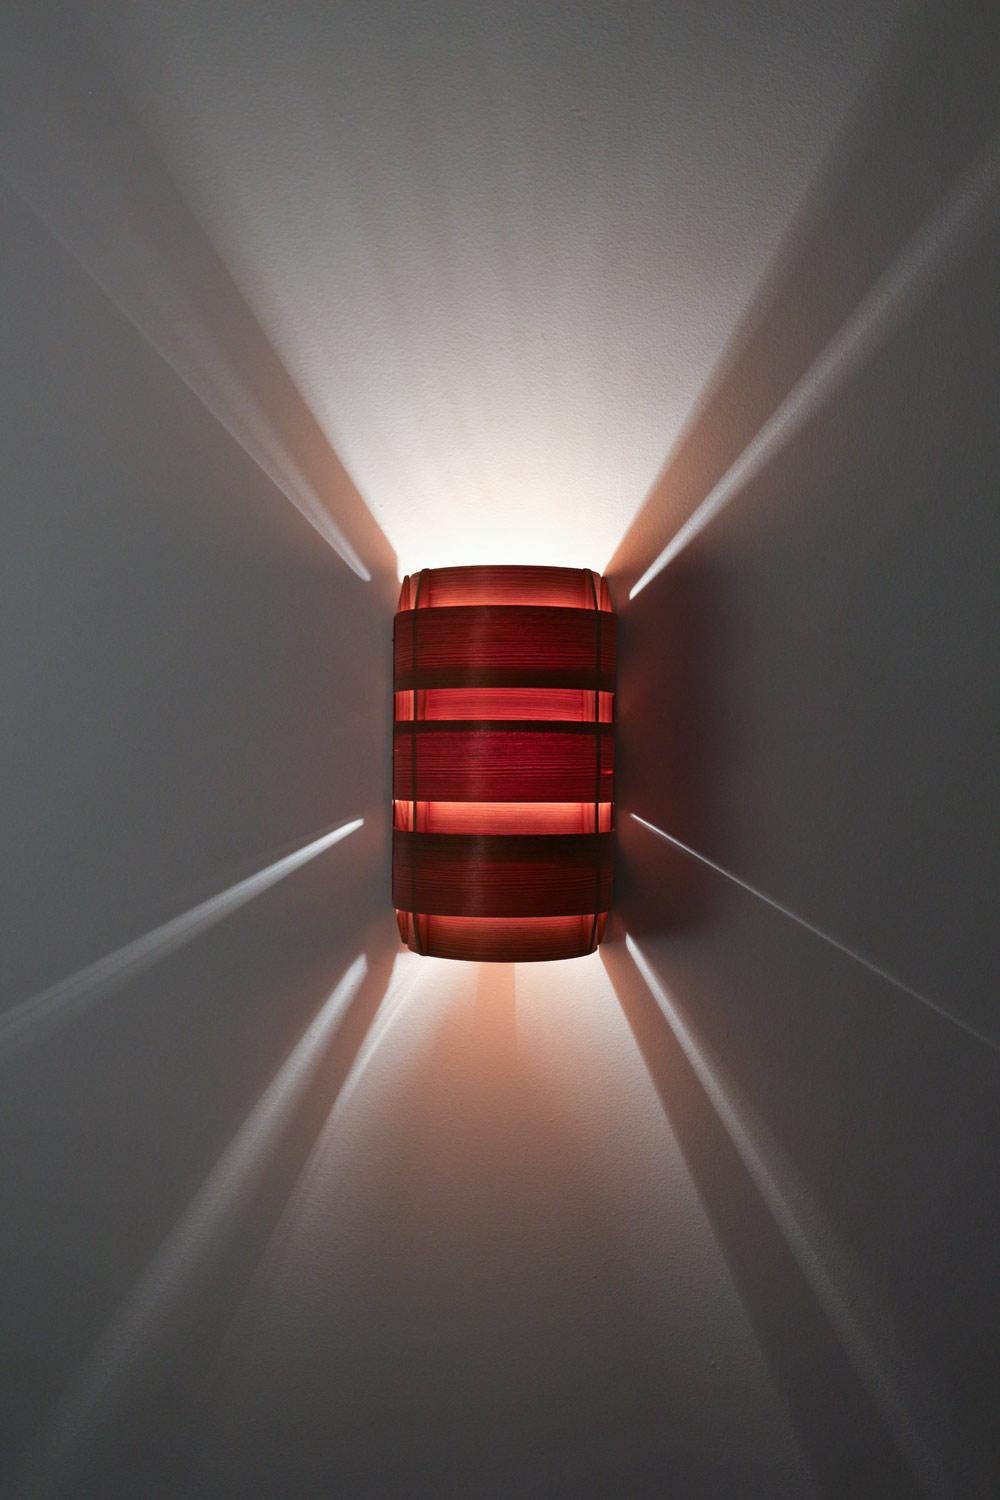 Beautiful wall lights by Swedish master Hans-Agne Jakobsson.
The lamps consists of a copper plate with pine lamellae, giving a stunning soft light when lit up.
Condition: Very good condition with light signs of use and age.